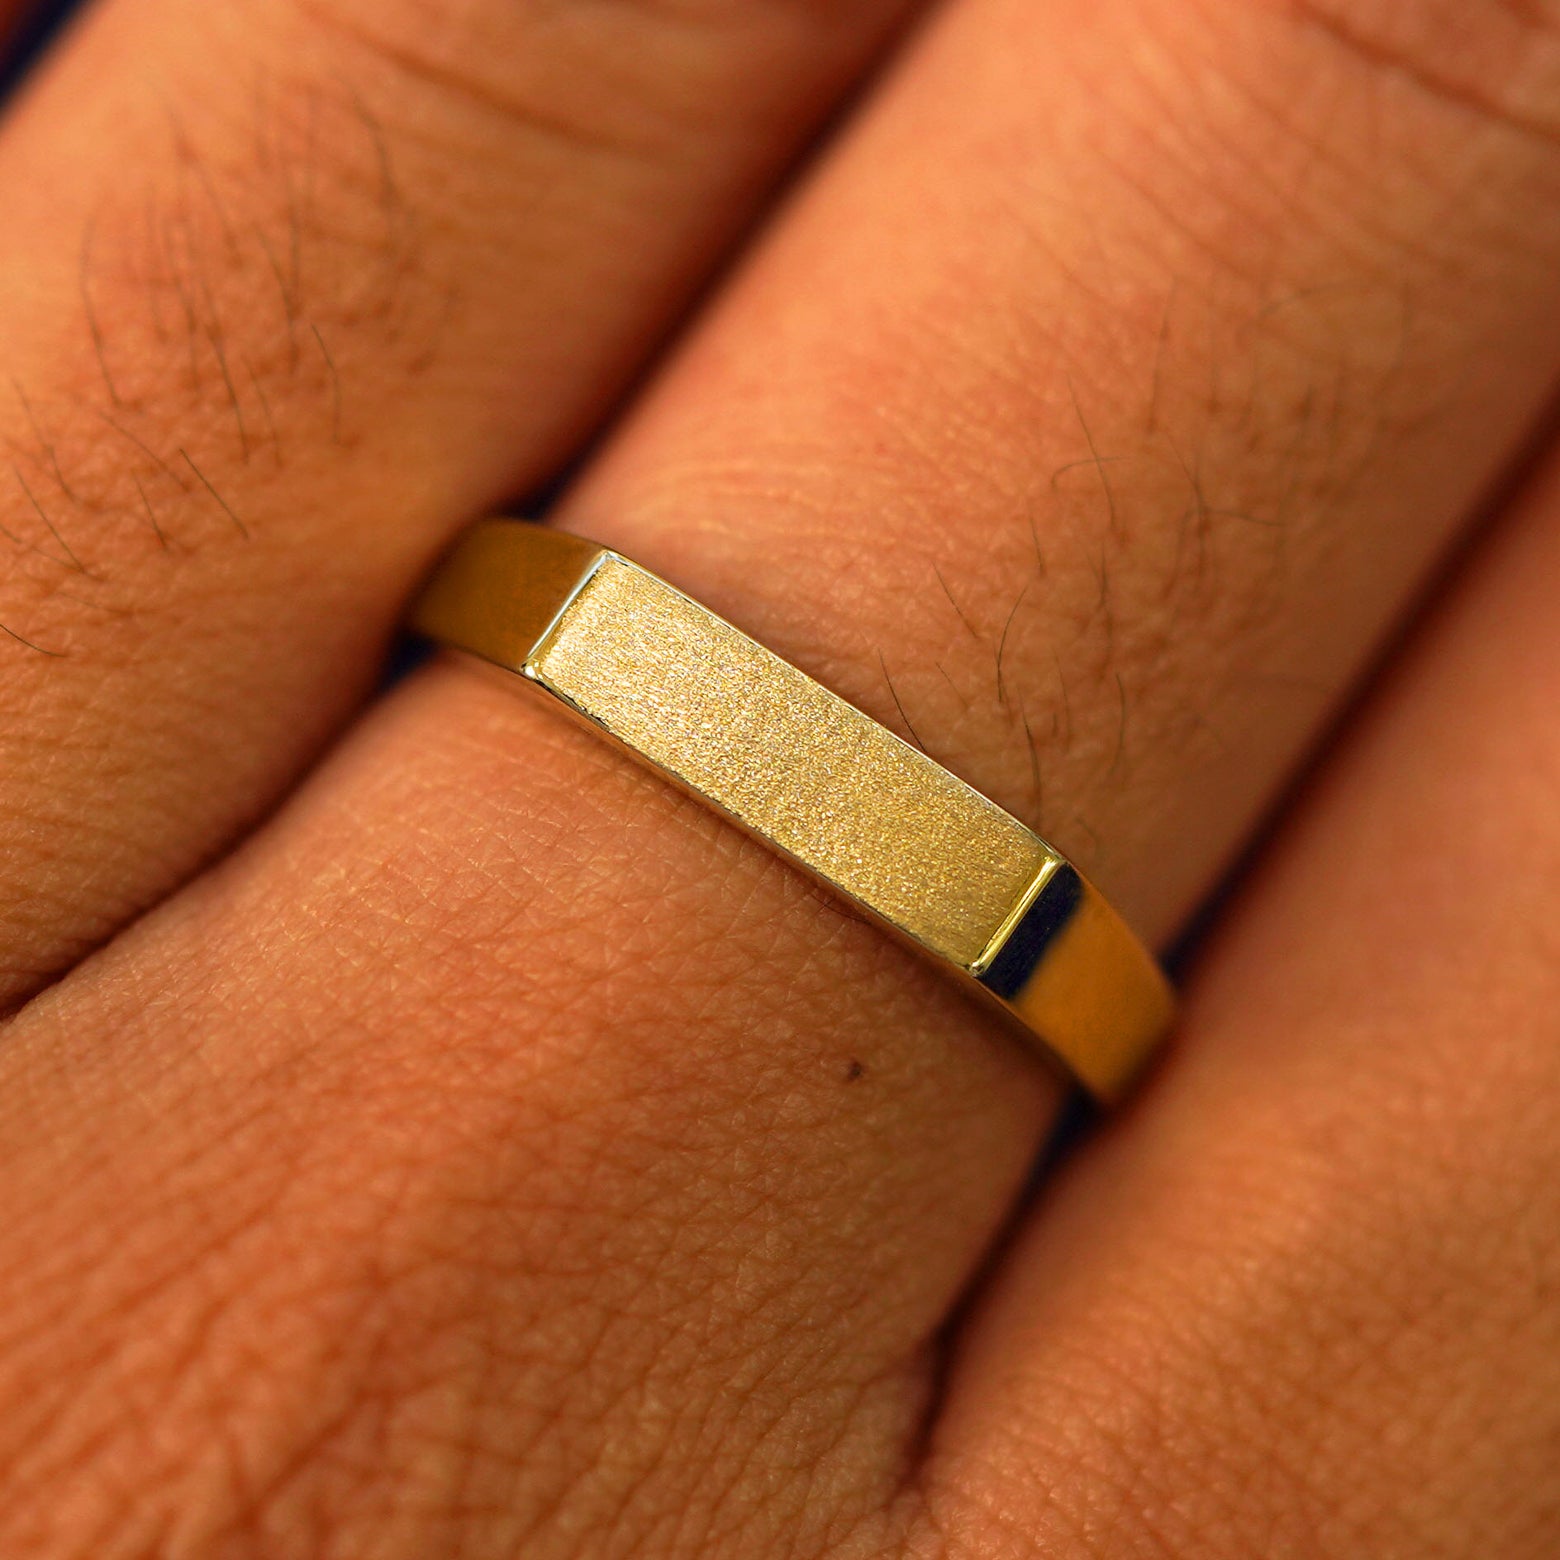 Close up view of a model's fingers wearing a 14k yellow gold Rectangular Signet Ring